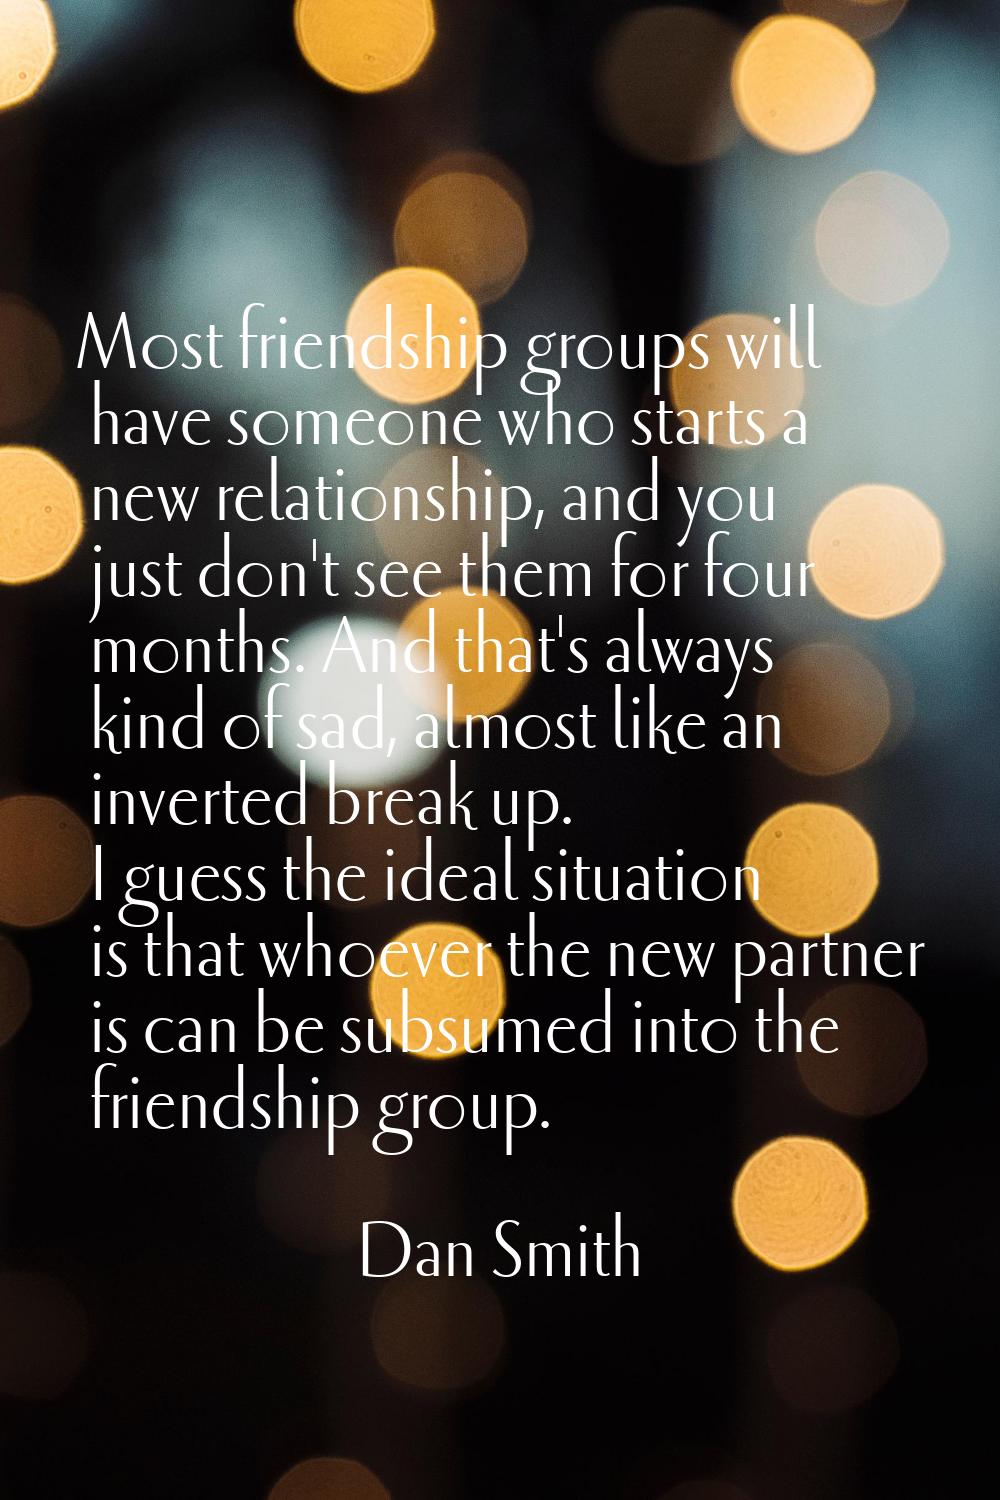 Most friendship groups will have someone who starts a new relationship, and you just don't see them